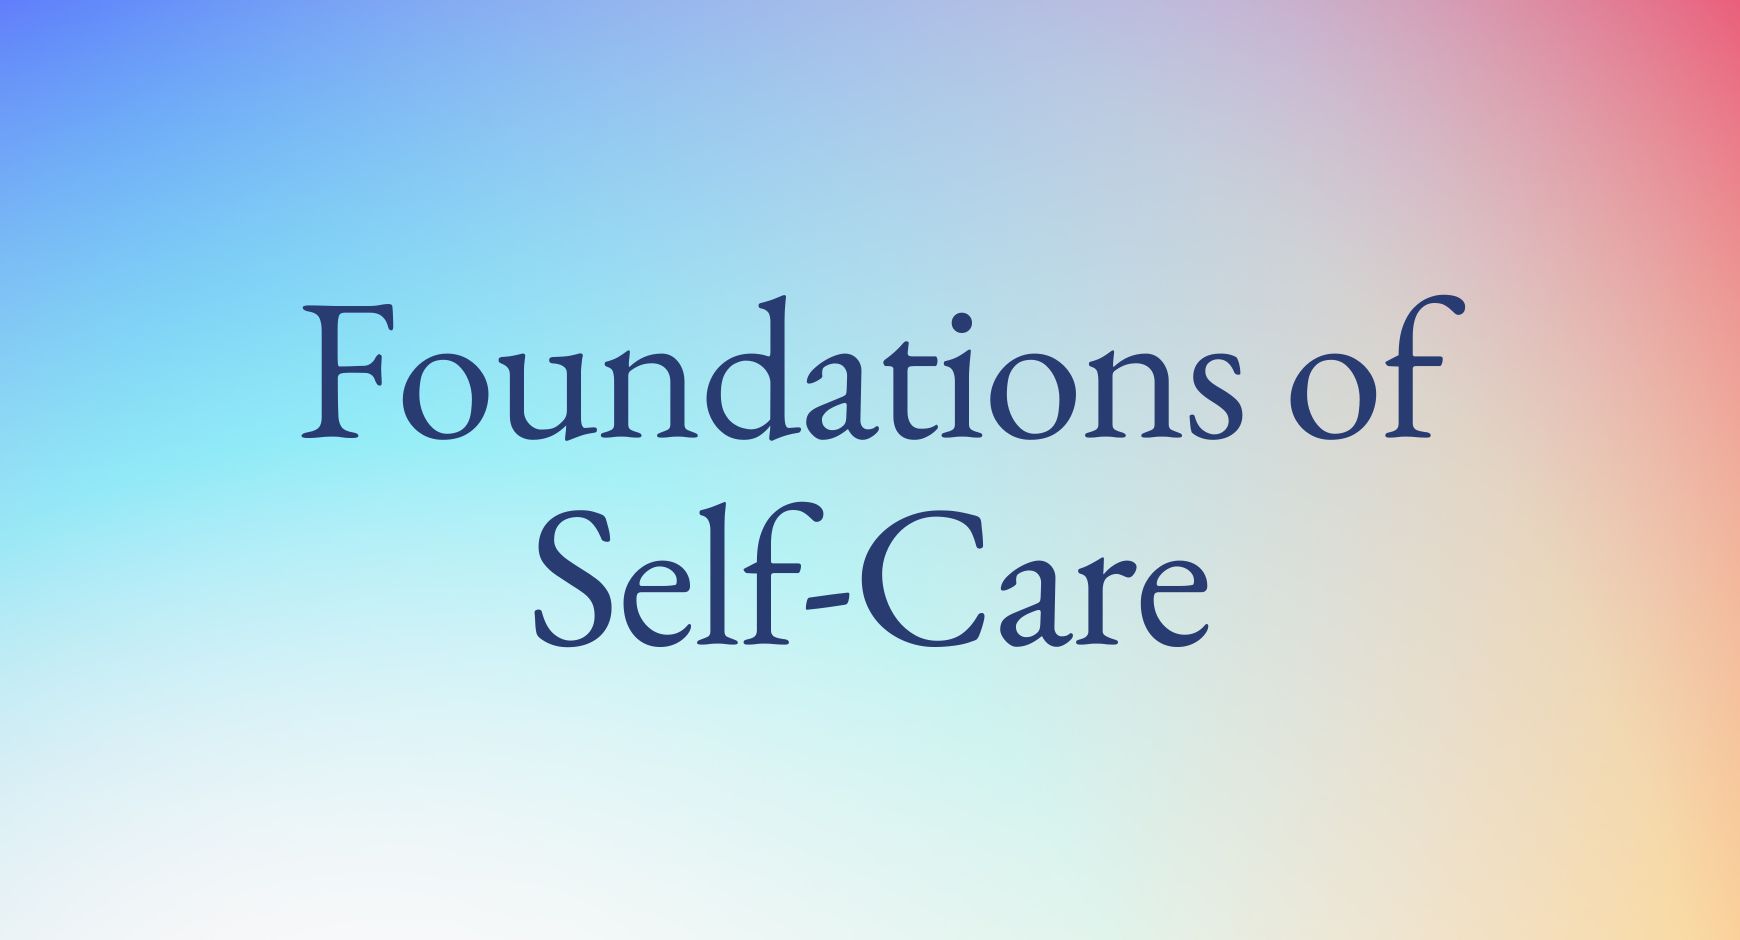 A rainbow background with the words "Foundations of Self-Care".